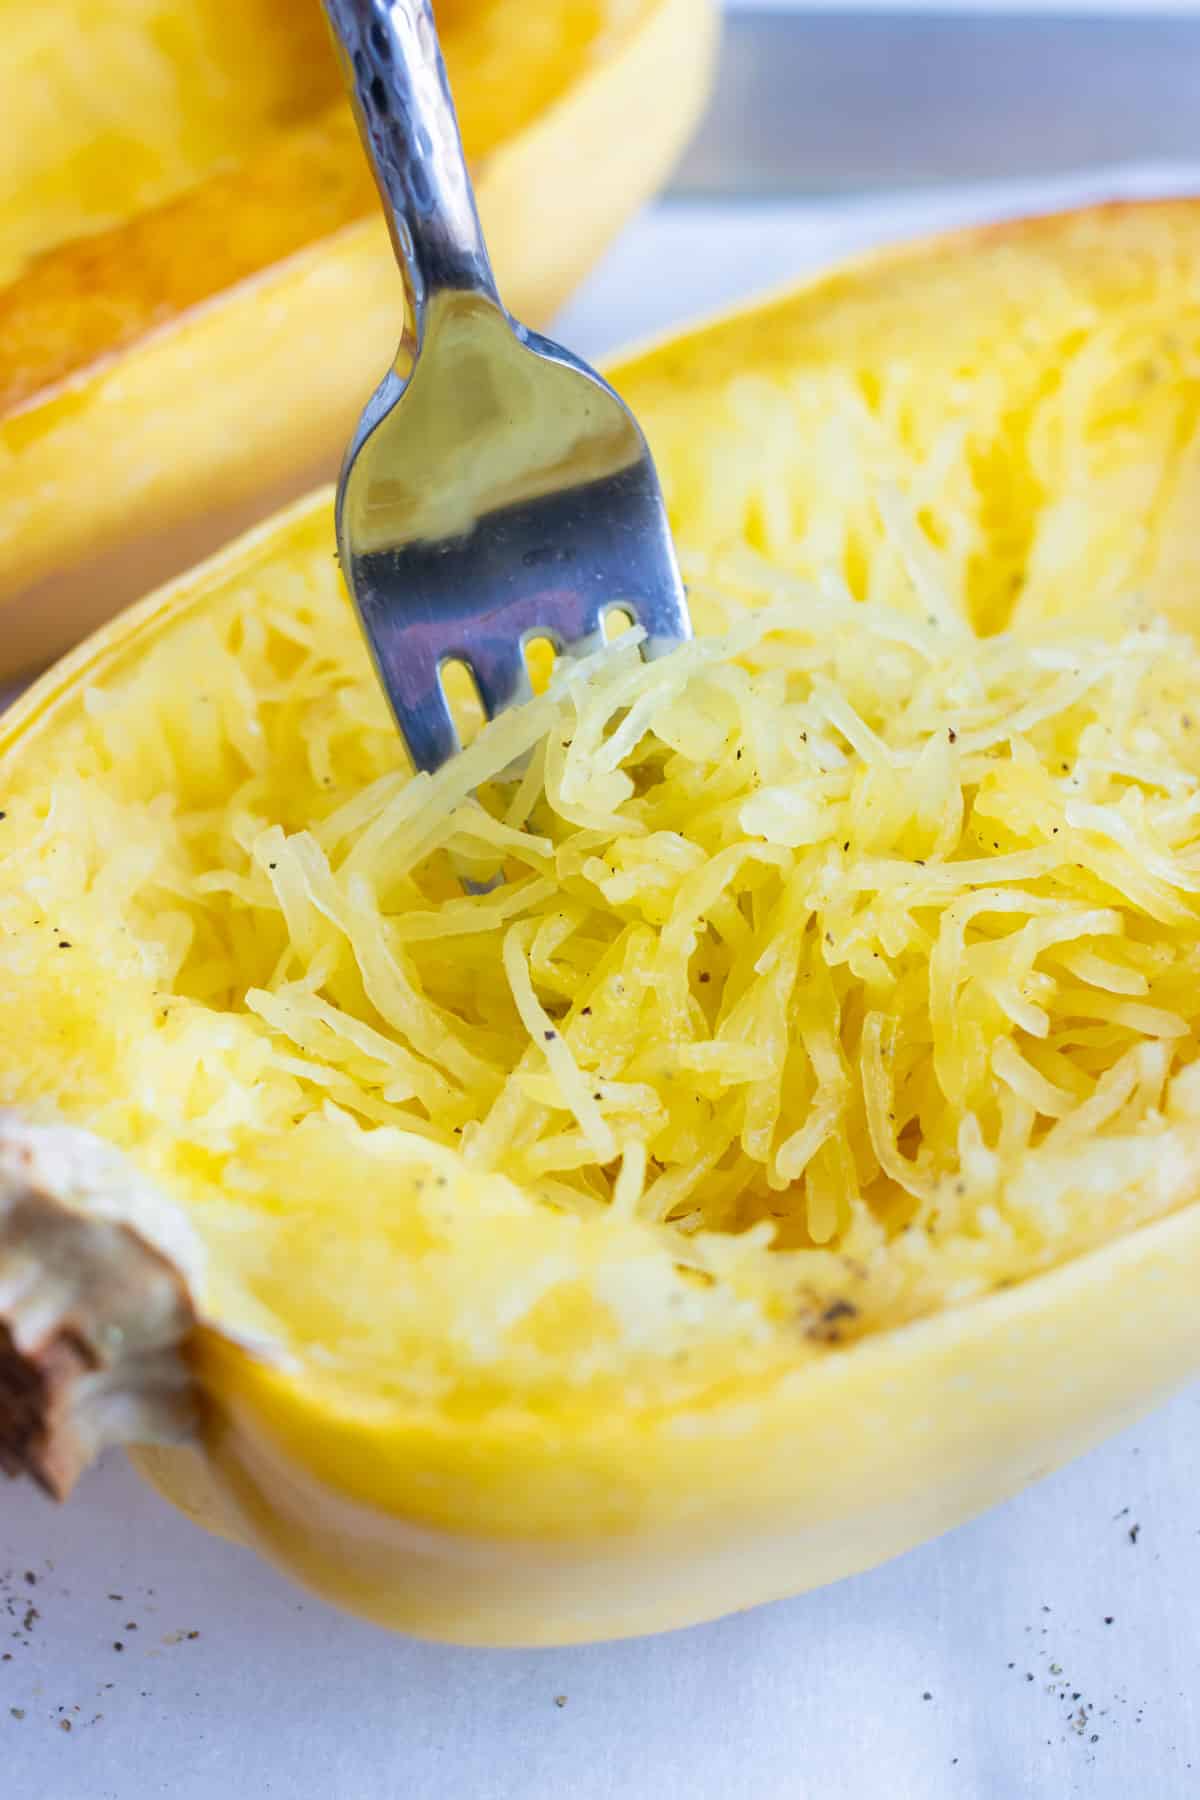 Learn how to roast spaghetti squash so you can easily shred it with a fork.